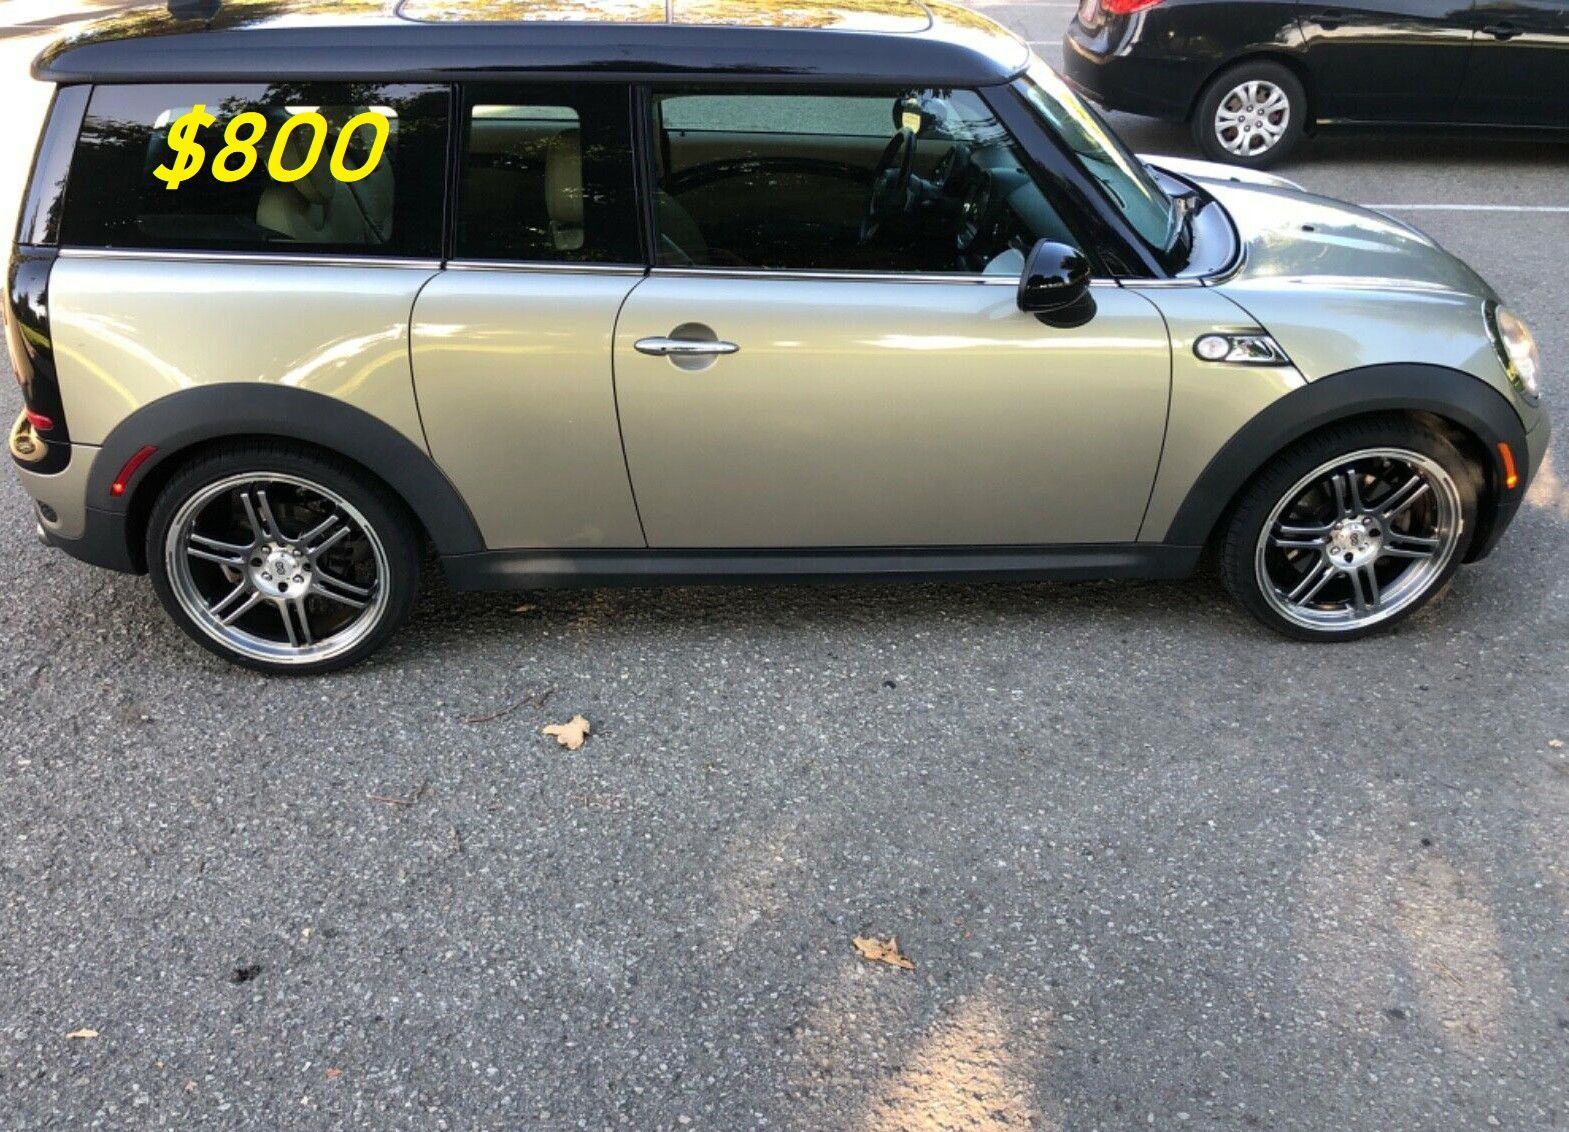 ❇️URGENT $8OO I am the first owner and I want to sell a 2009 Mini cooper Runs and drive strong! ❇️